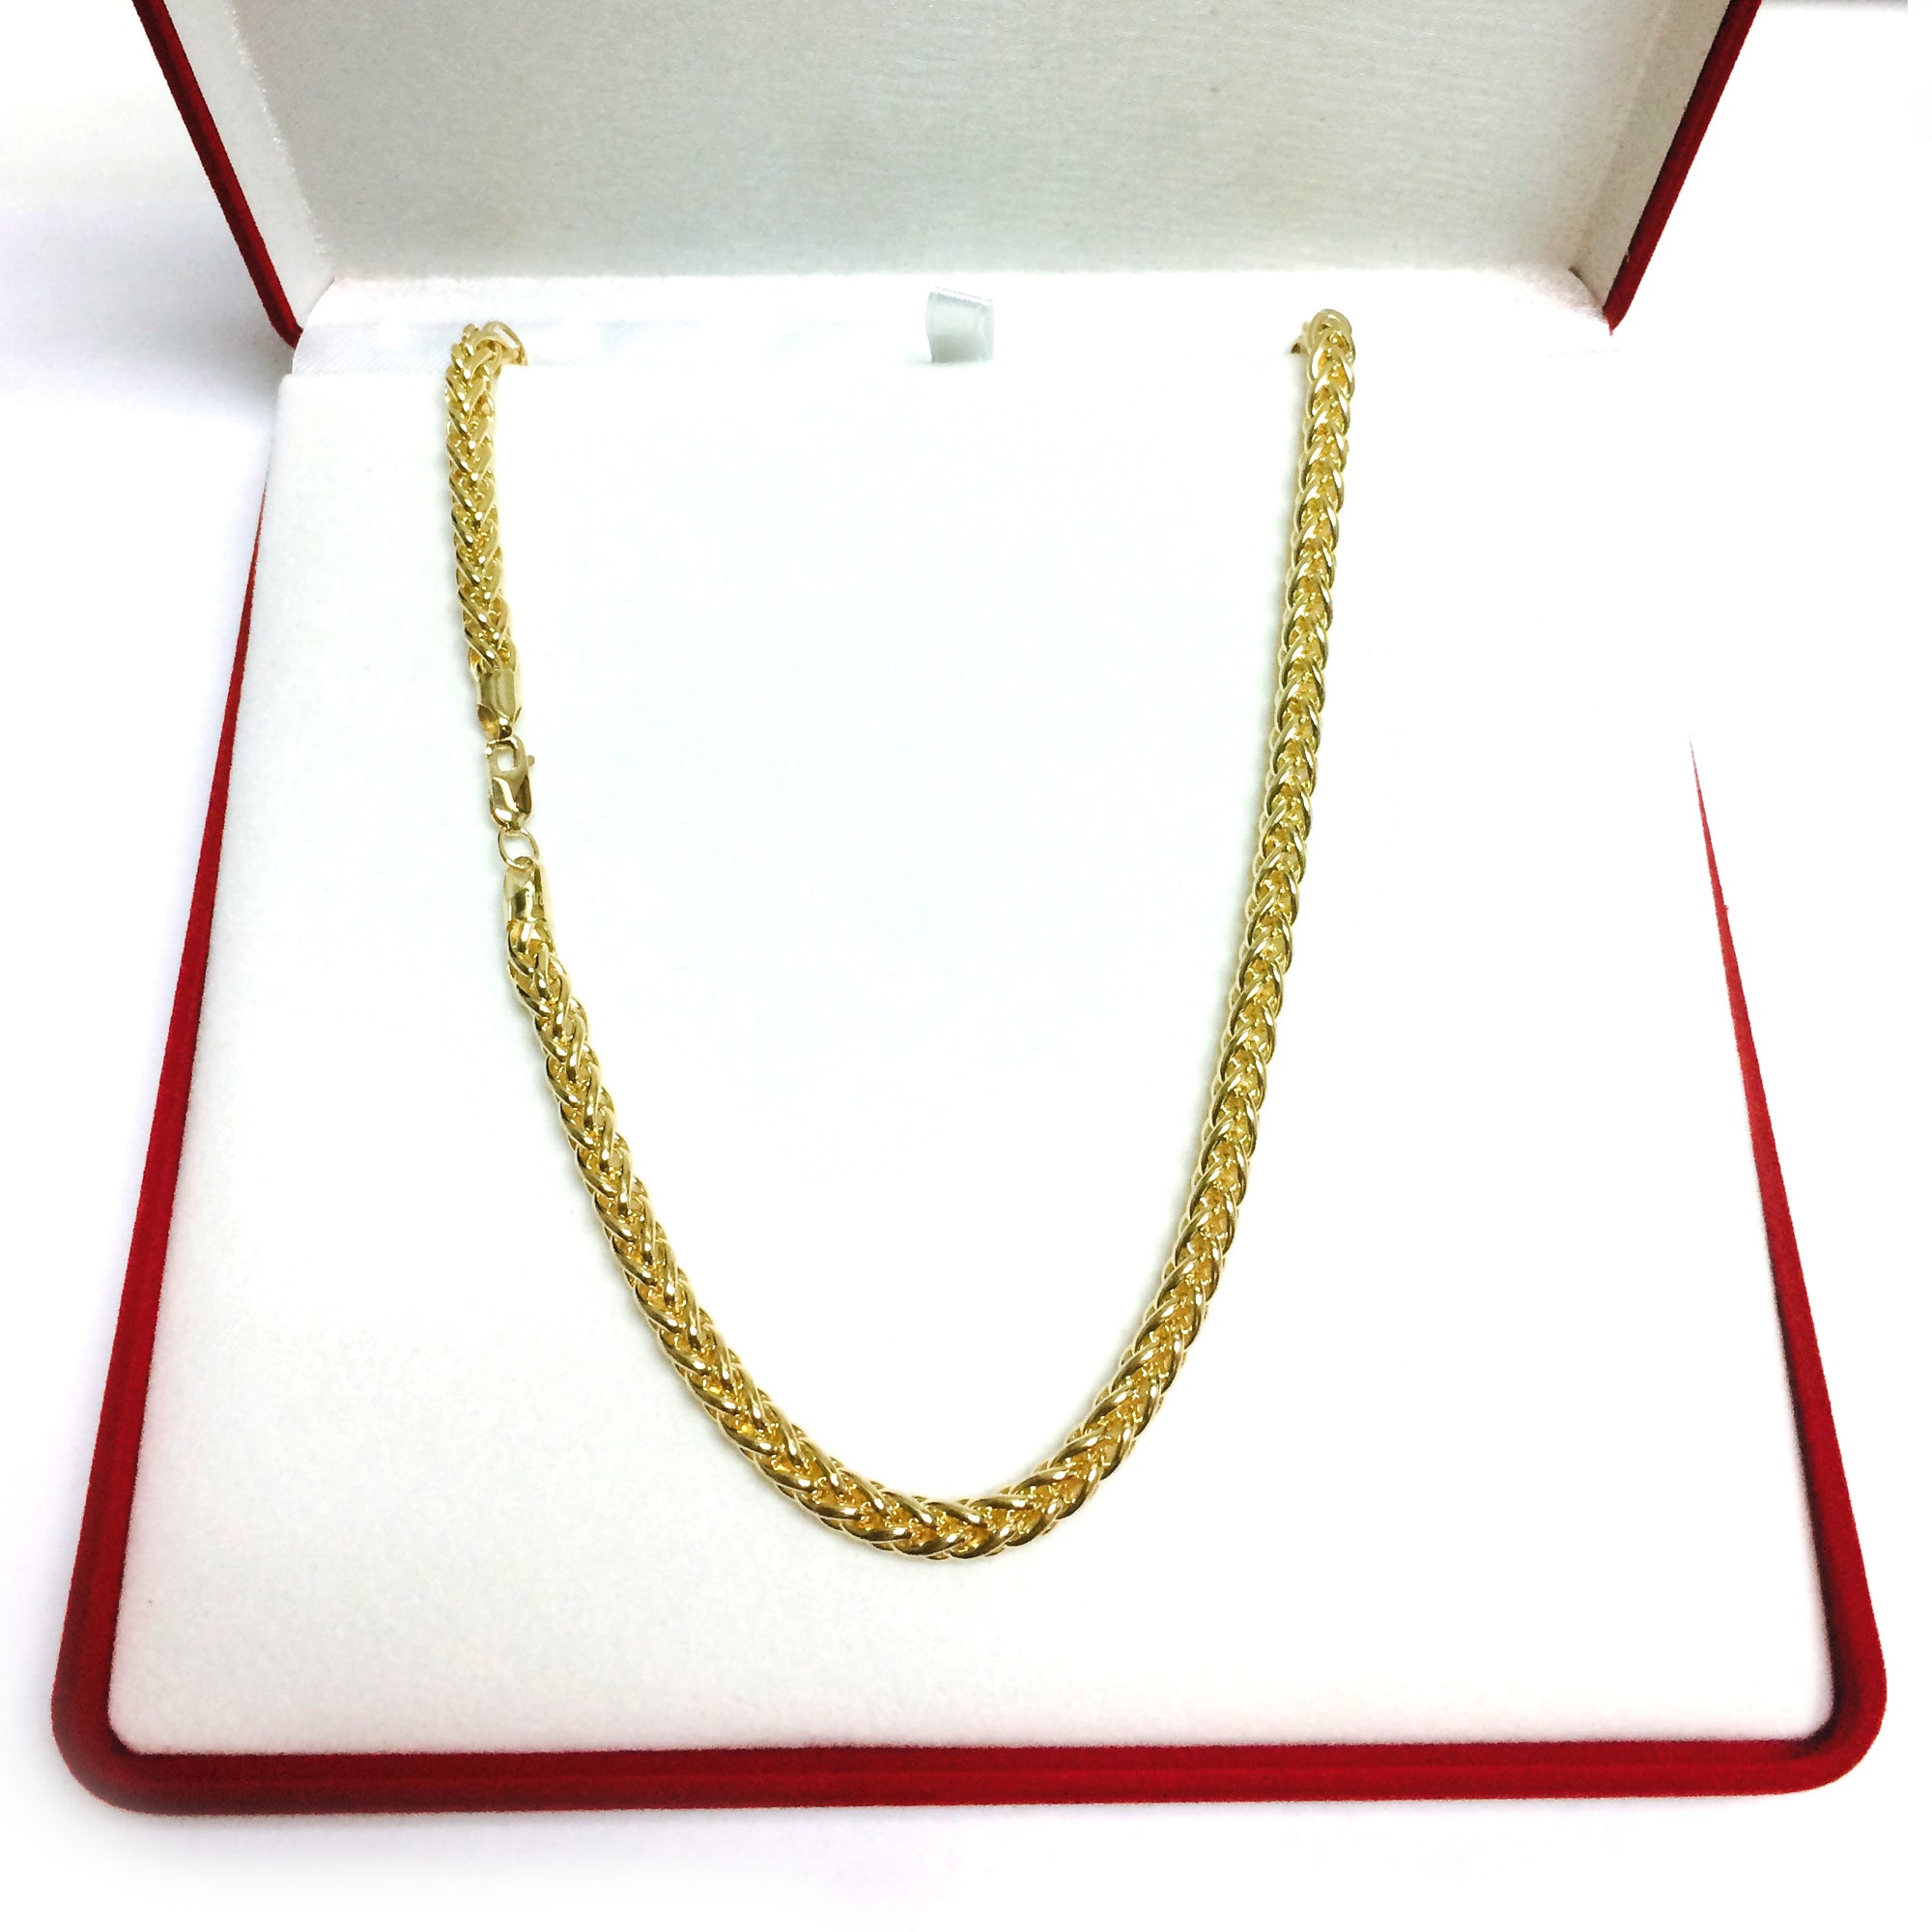 14K Yellow Gold Filled Round Franco Chain Necklace, 6.0mm Wide fine designer jewelry for men and women